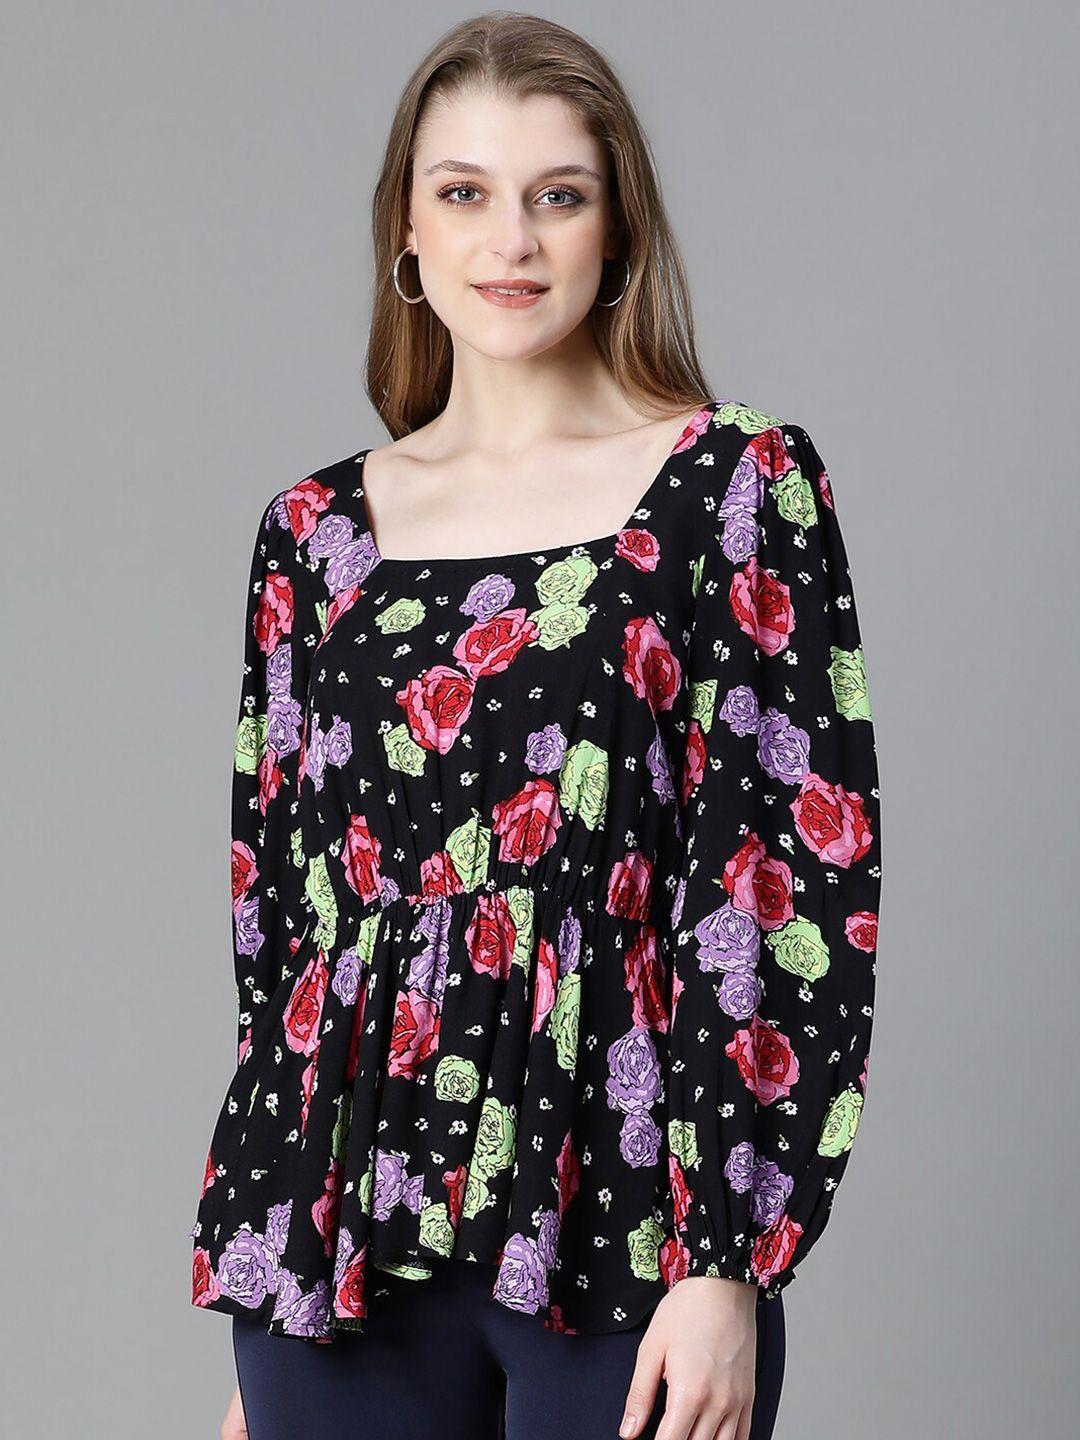 oxolloxo floral printed square neck puff sleeves top